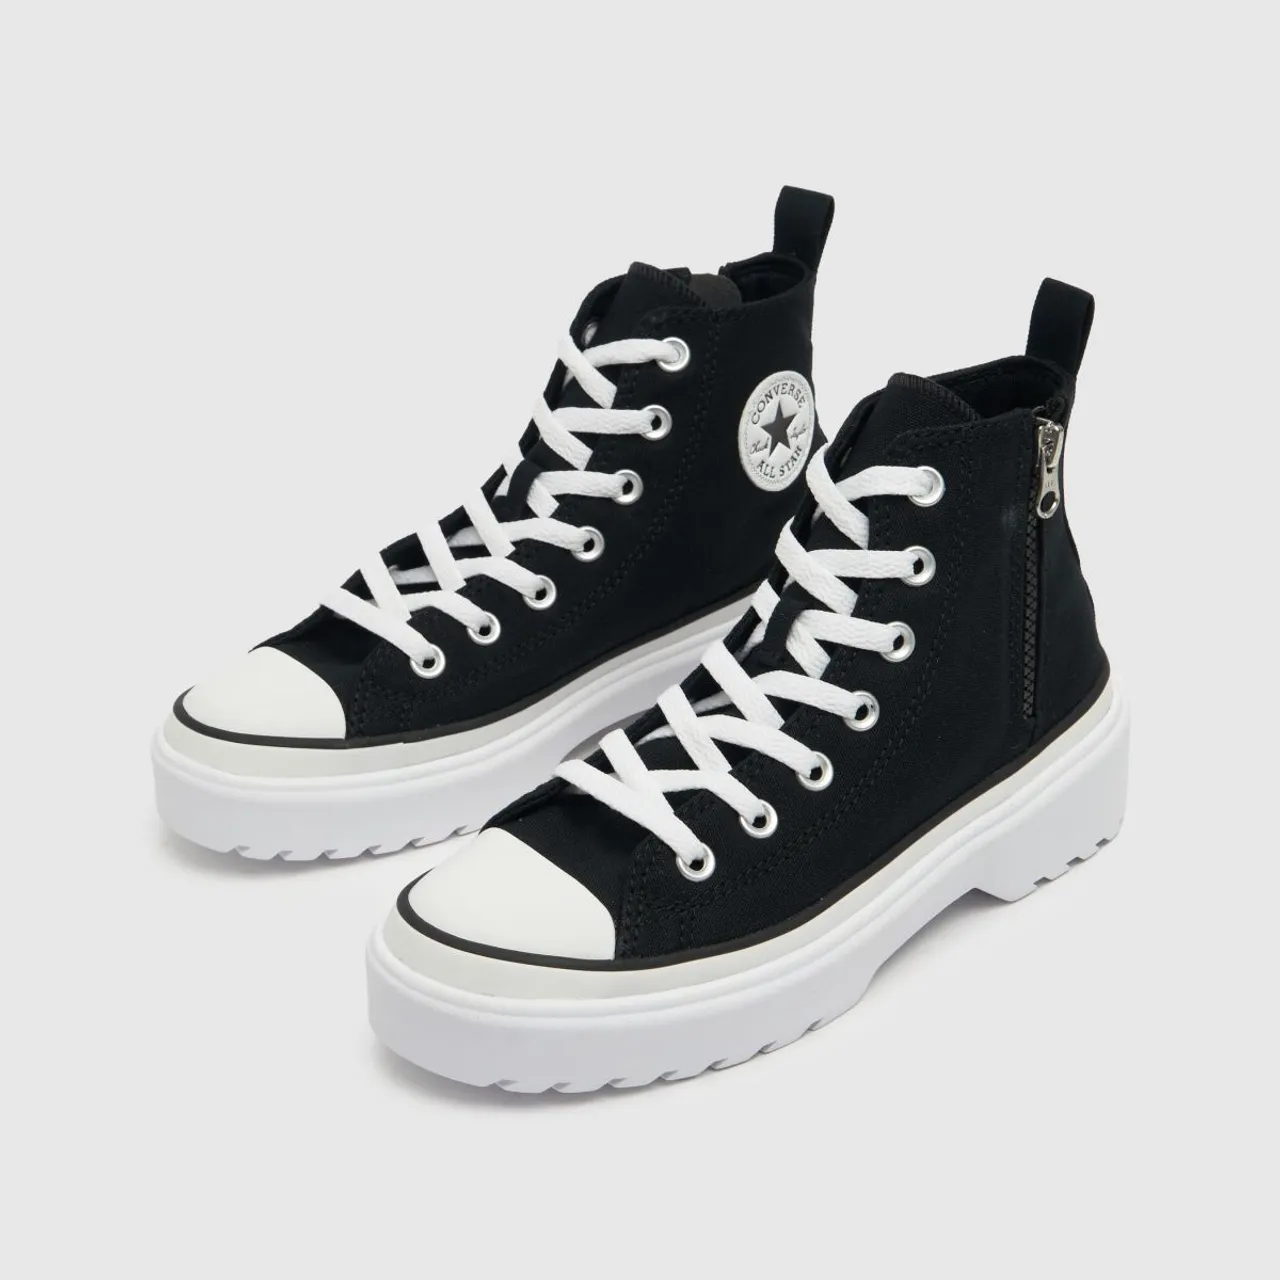 Converse Black & White Lugged Lift Girls Youth Trainers